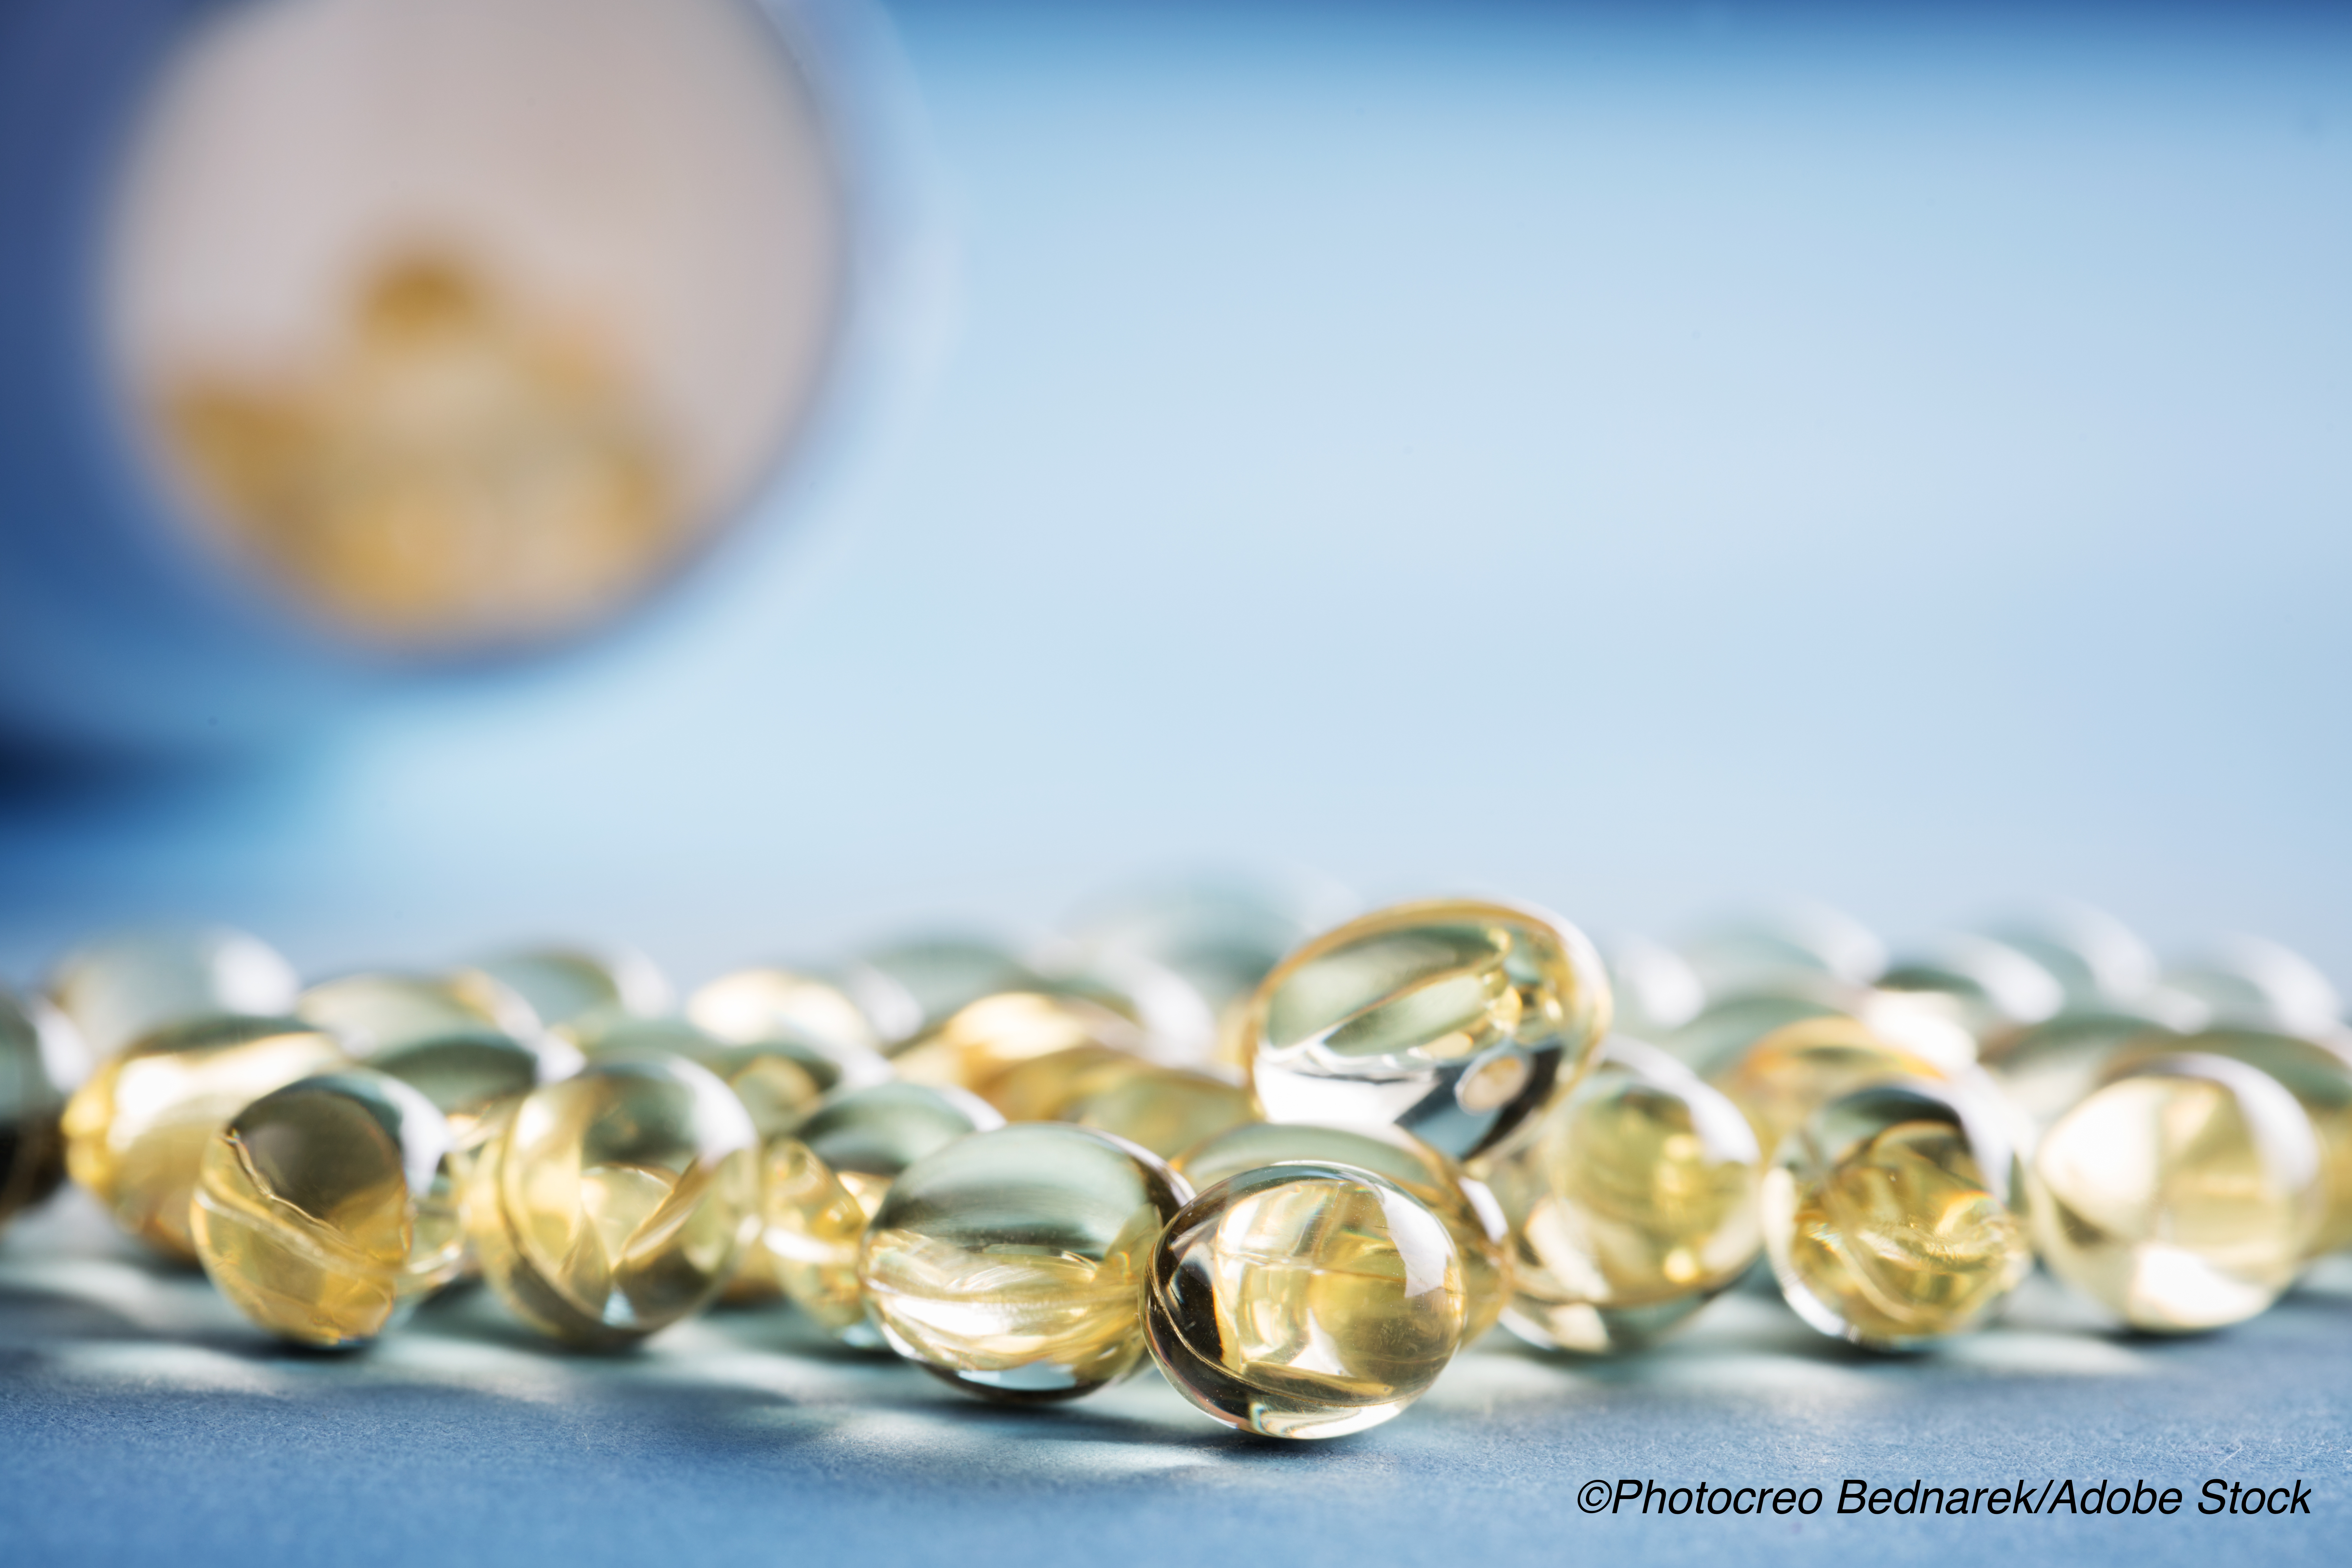 Vitamin D Has Small but Significant Impact on Respiratory Infection Risk